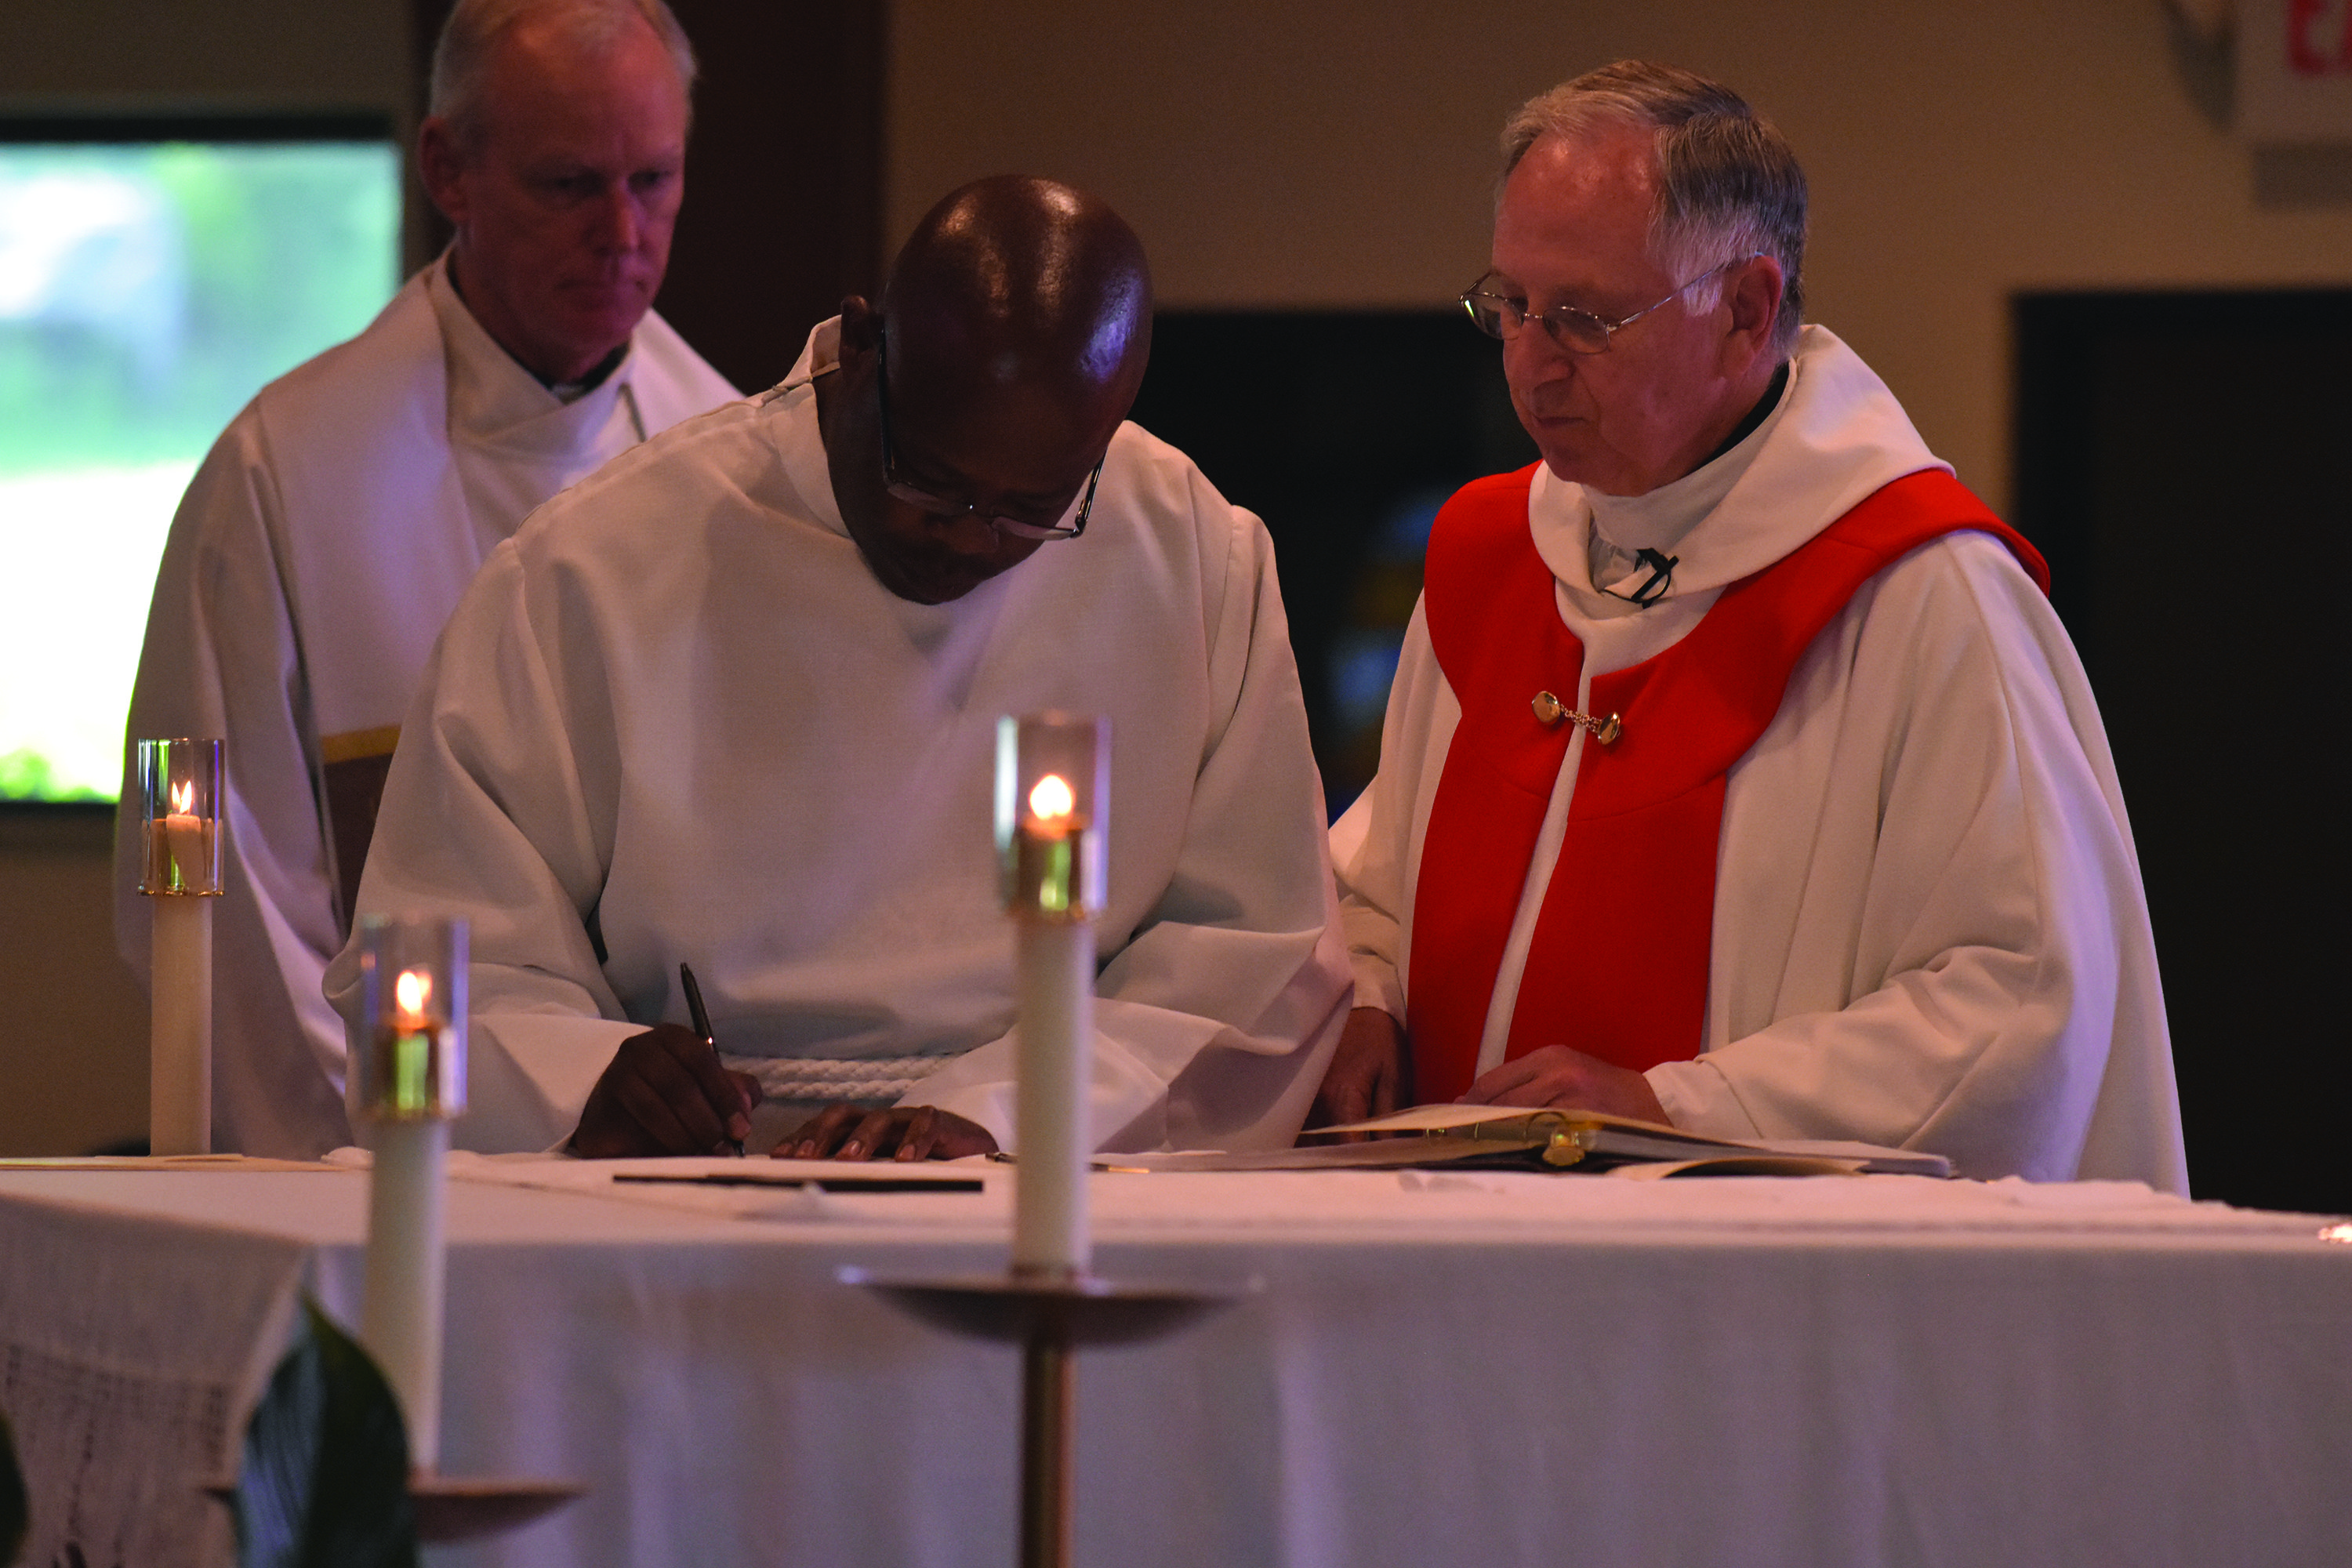 First Mass offered in new Glenmary mission